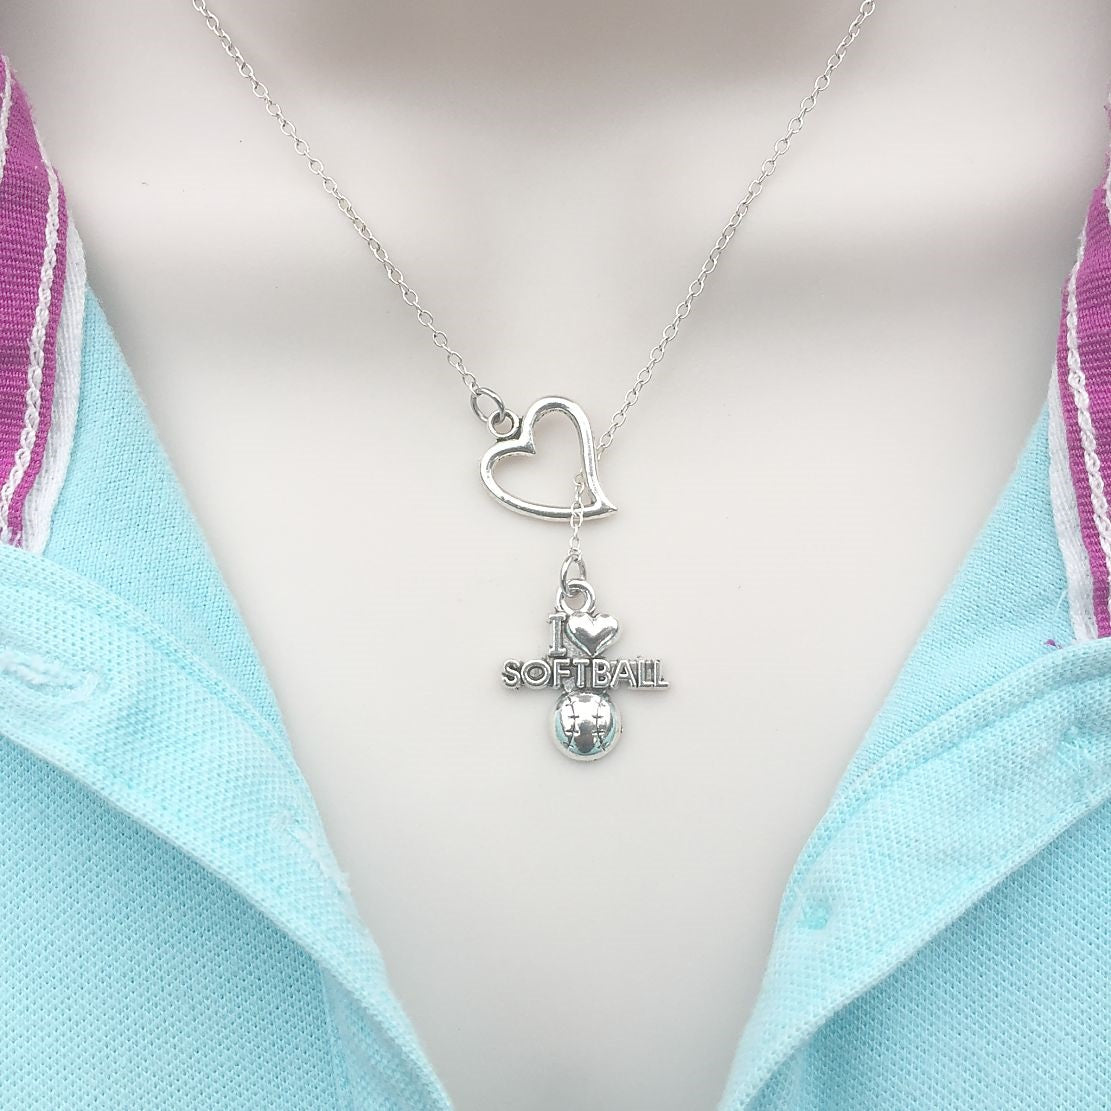 I Love Softball Silver Lariat Y Necklace.